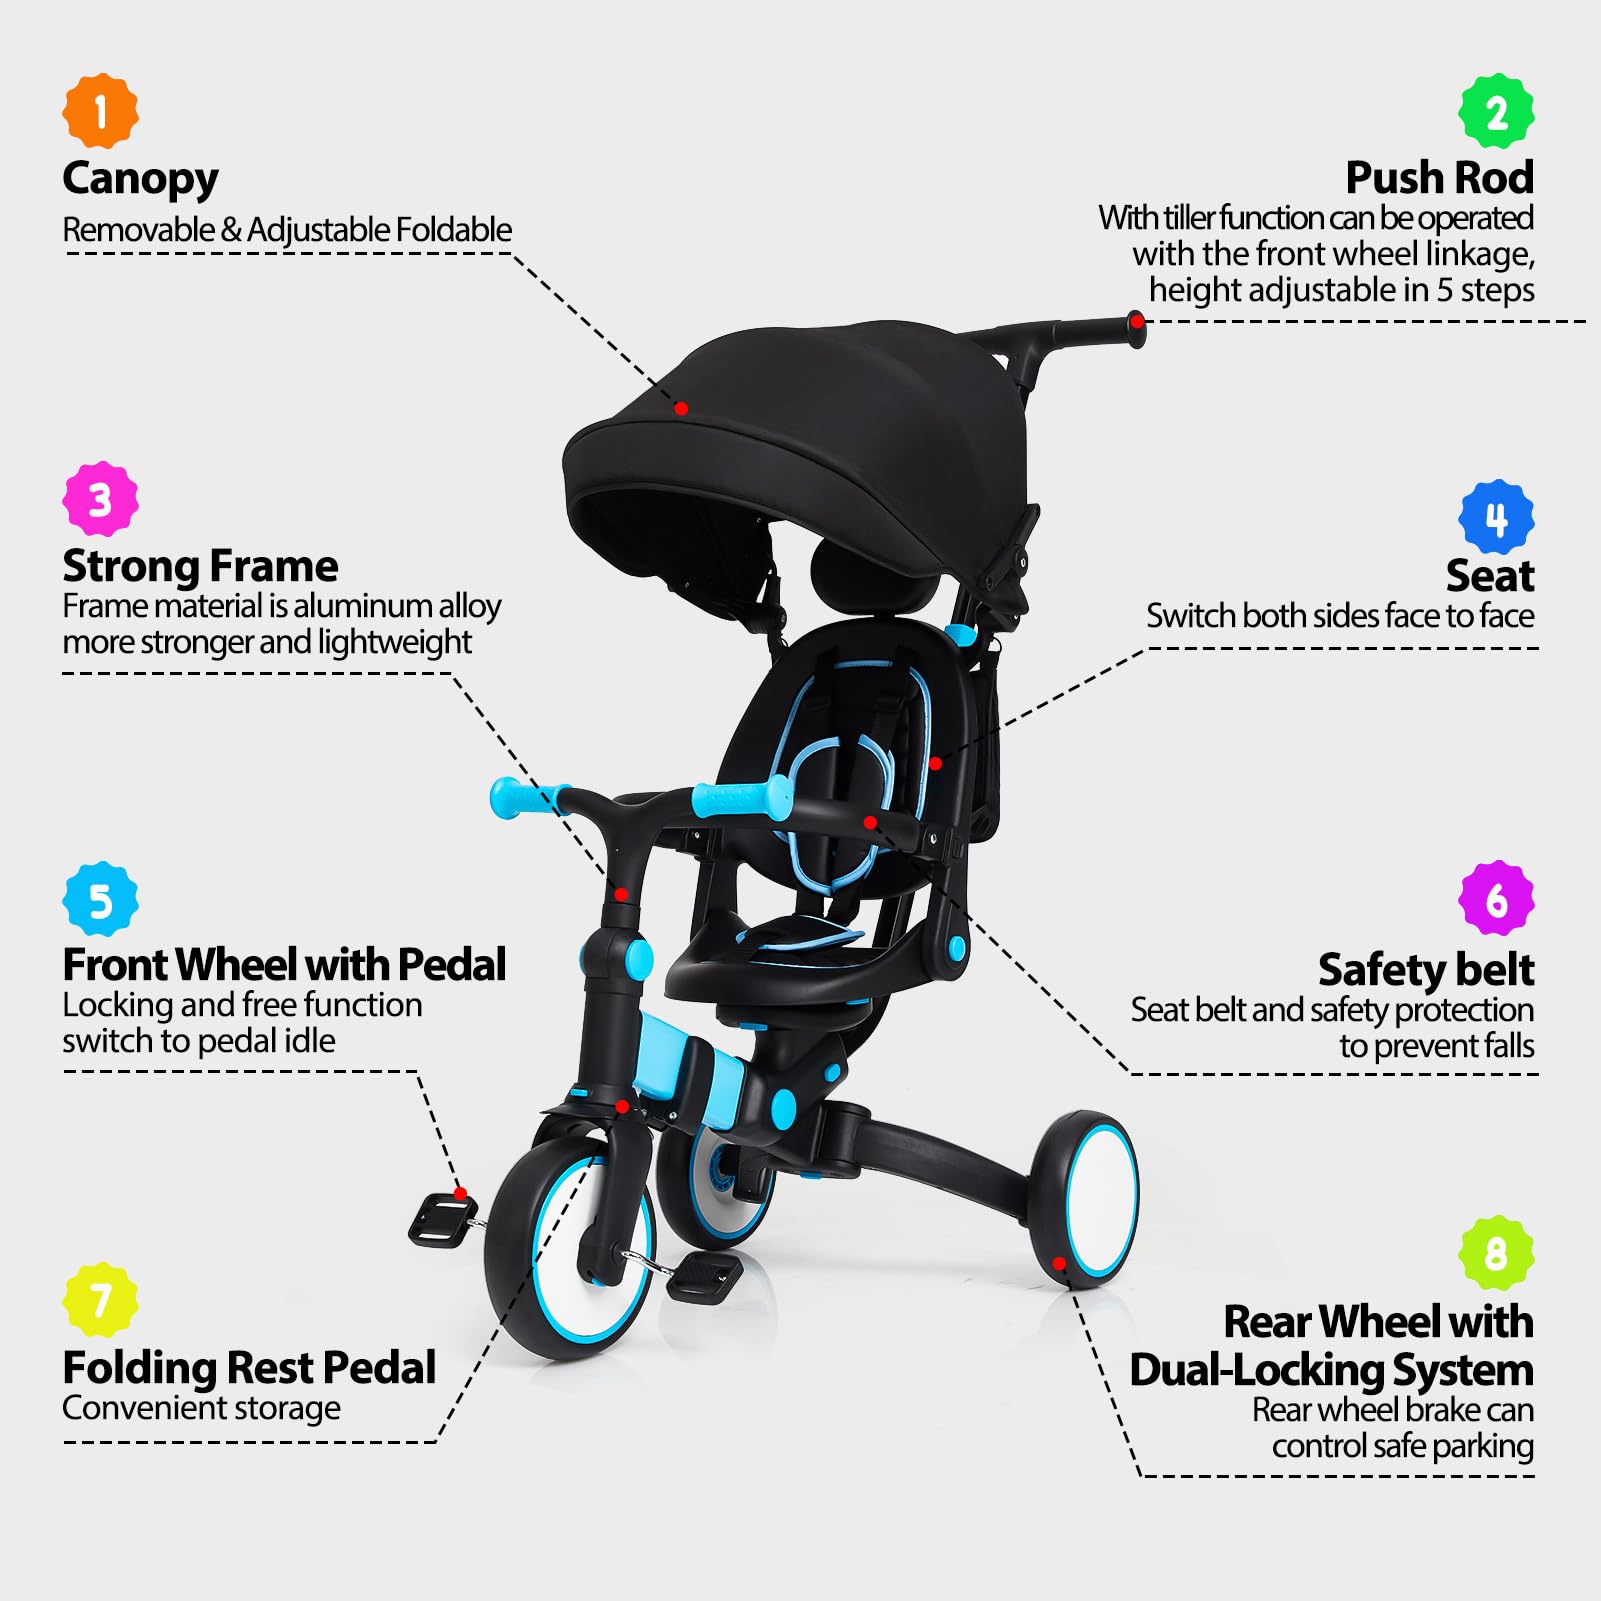 GAOMON 7 in 1 Baby Tricycle, Foldable Toddler Tricycle with Removable and Adjustable Parent Handle, Toddler Push Bike with Removable Pedal, Canopy, and Guardrail, Tricycle for 12-72 Months（Blue）